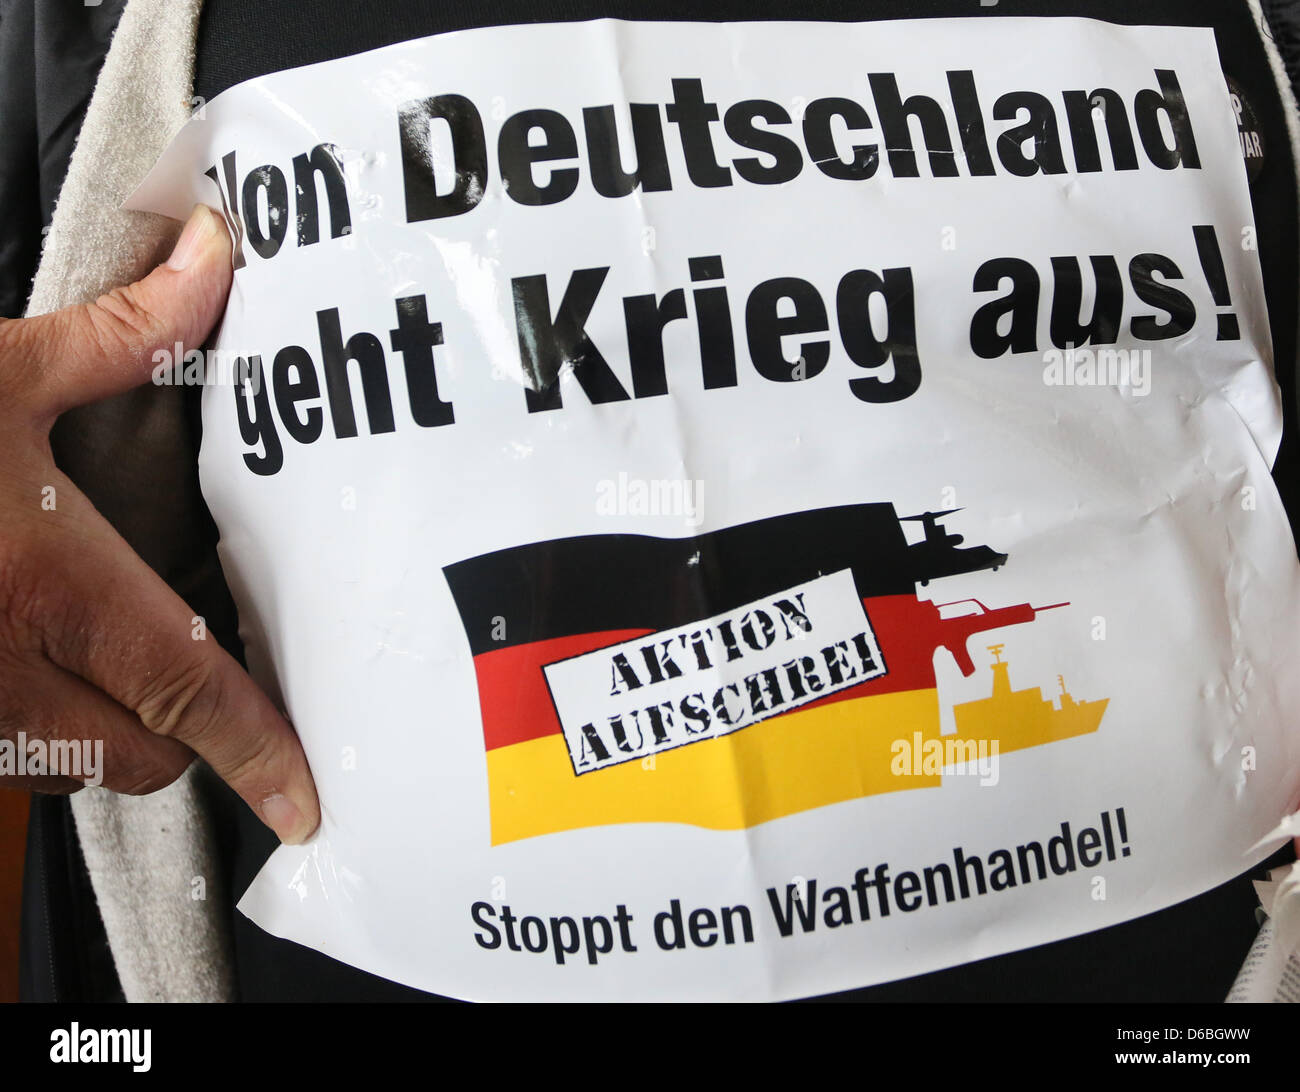 'War proceeds from Germany!' is written on a sign at the representative office of defence company Krauss-Maffei Wehrtechnik in Berlin, Germany, 31 August 2012. People demonstrated against Germany's international supply of tanks to conflicted areas under the motto 'Action Outcry - Stop Arms Trade'. Photo: Stephanie Pilick Stock Photo